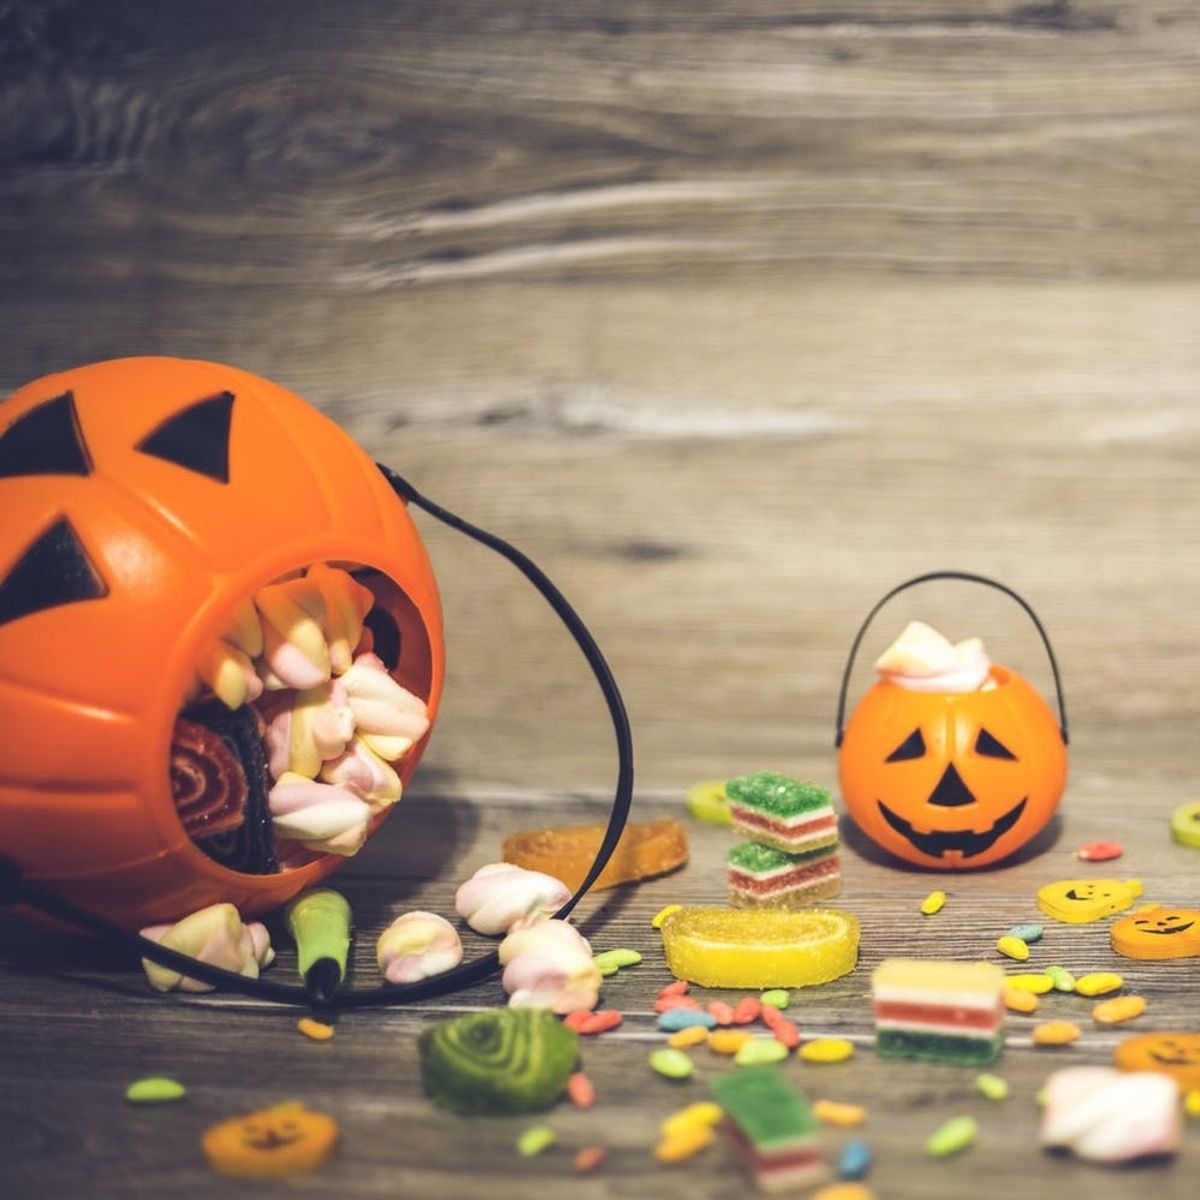 10 Clever Ways to Respond When Someone Candy-Shames You on Halloween